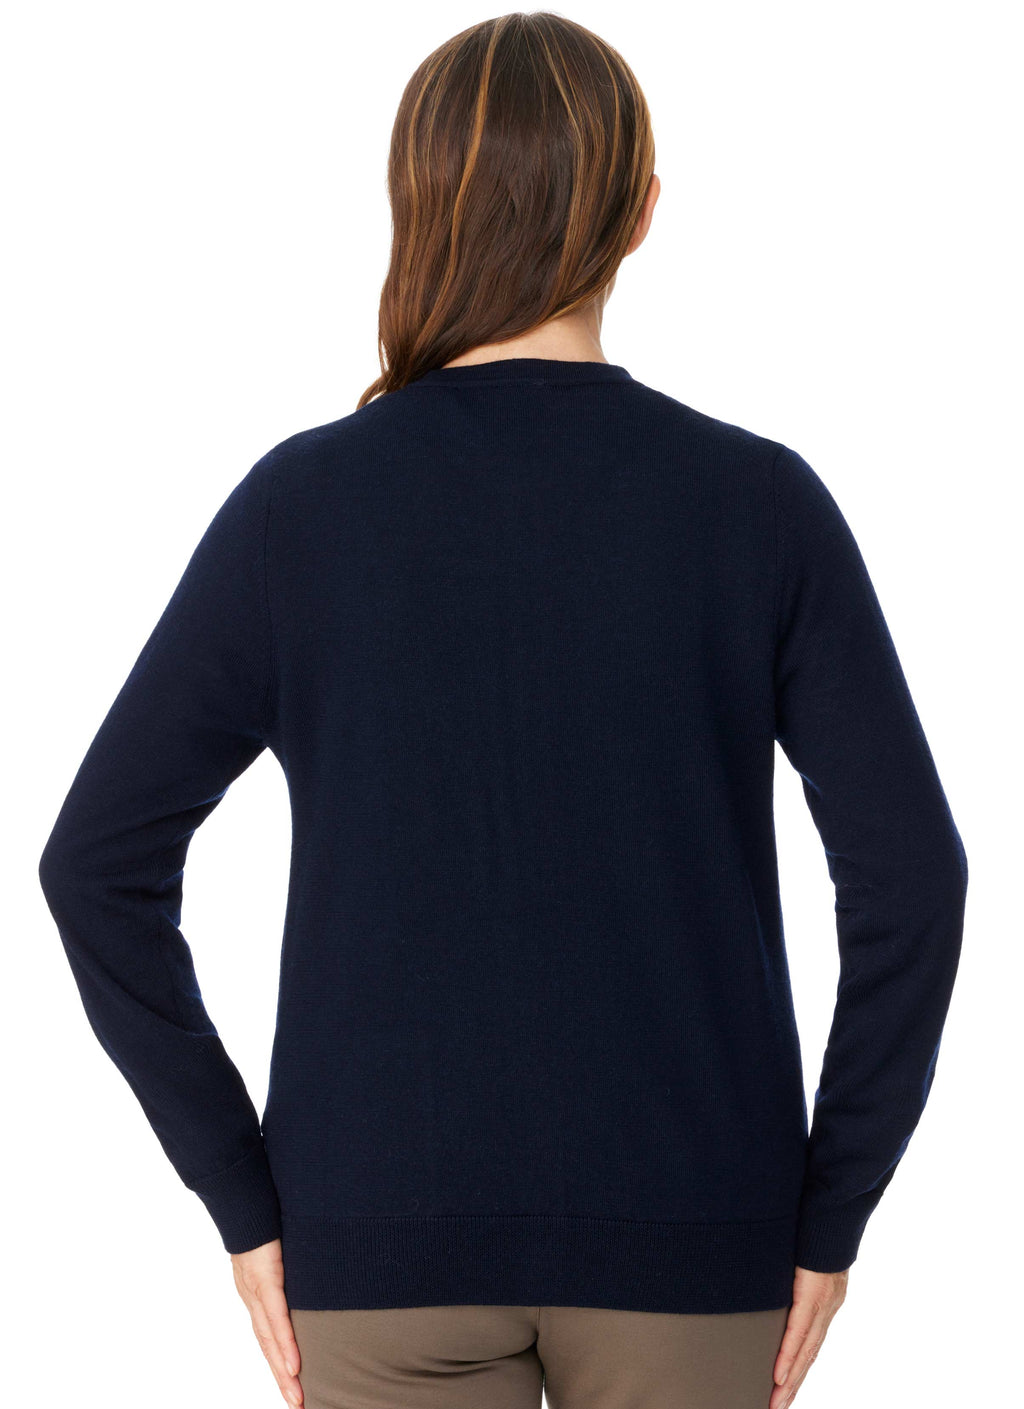 LEVENDALE CLASSIC CARDIGAN WITH POCKETS - NAVY